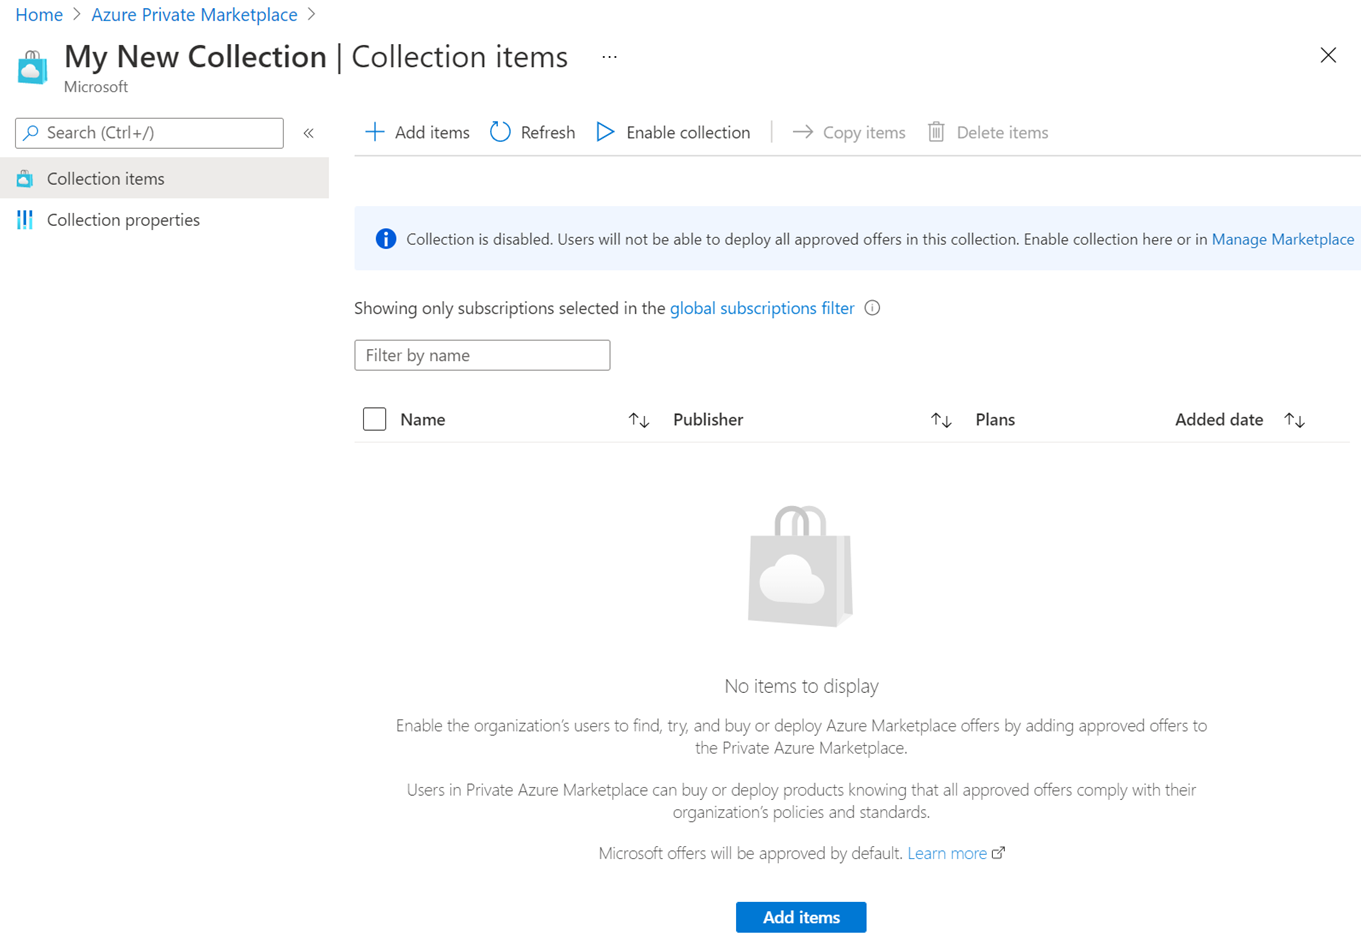 Shows a new and empty Collection Items window.